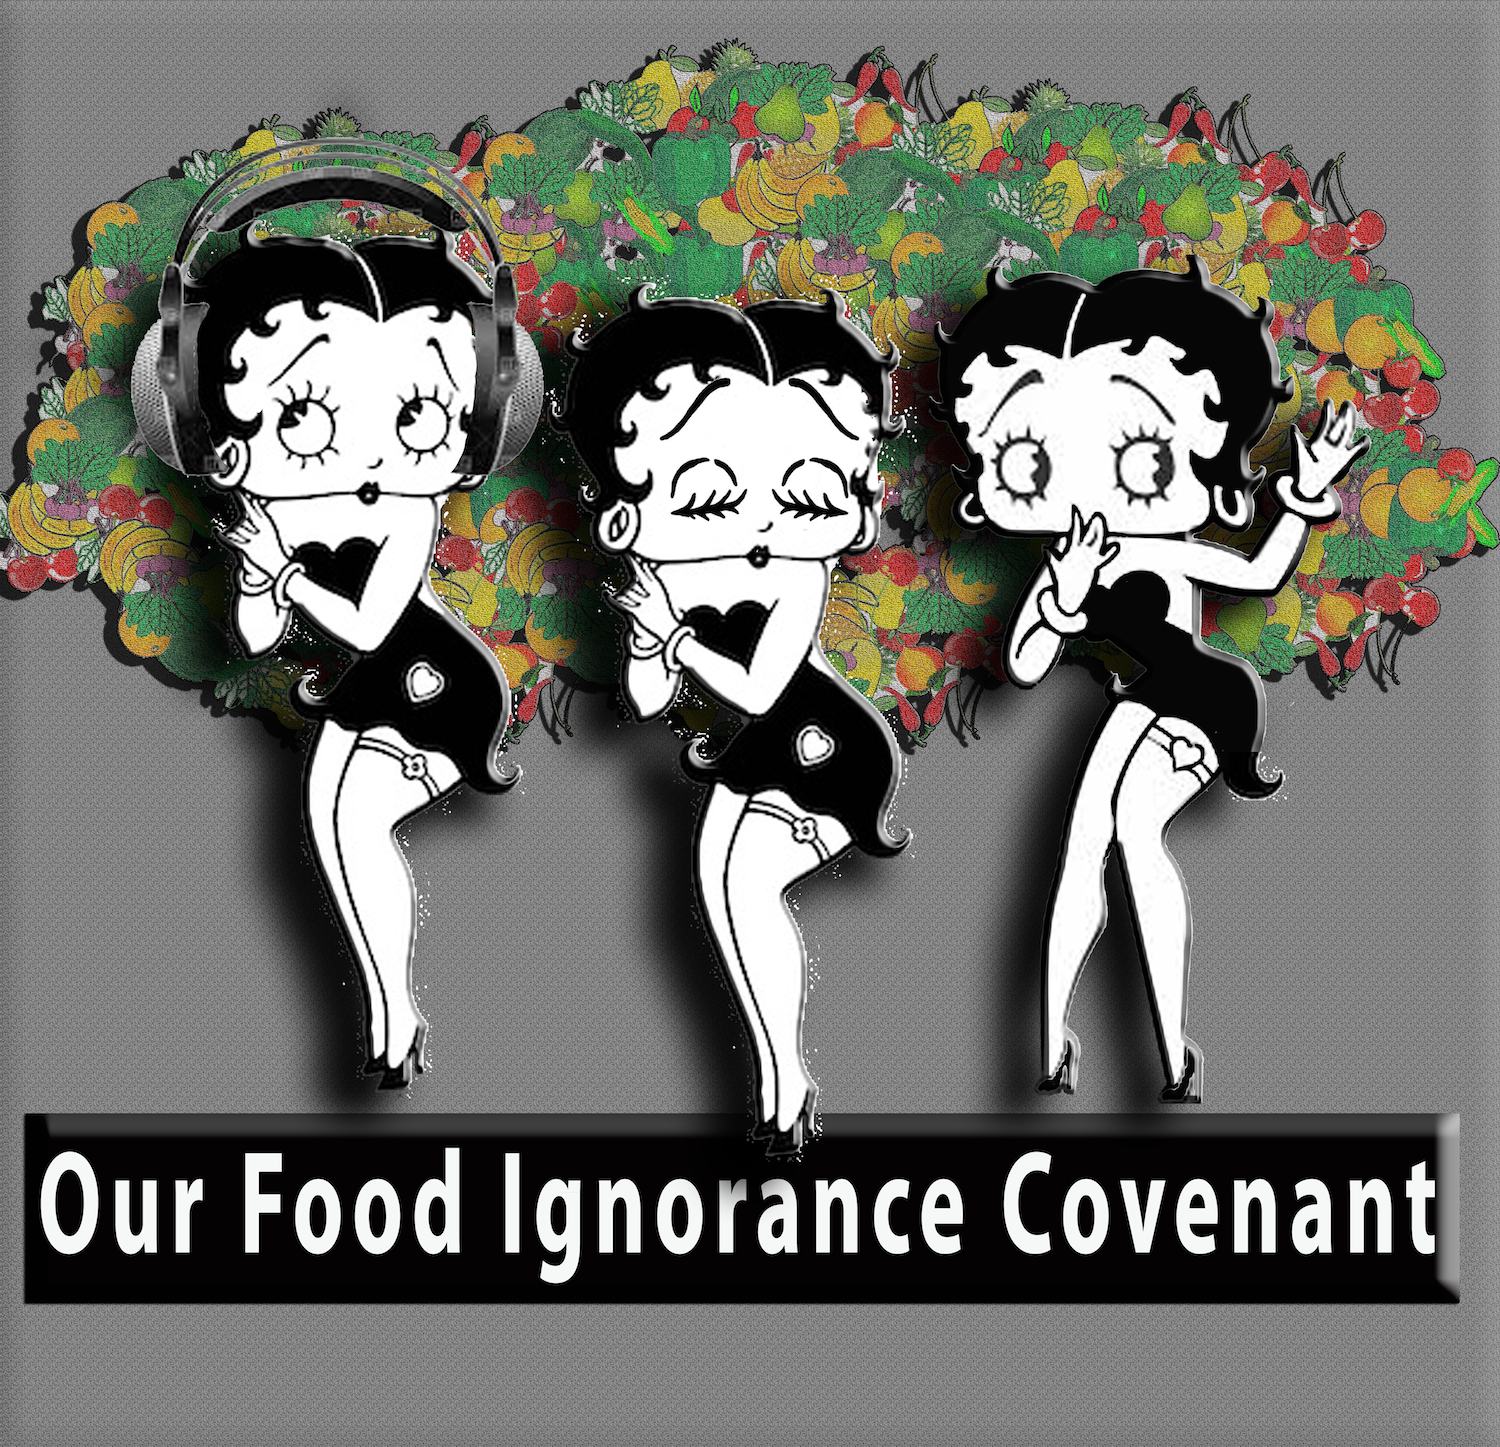 Food Chain Radio Michael Olson hosts nn Vileisis, author of Kitchen Literacy, for a conversation about our food ignorance covenant.